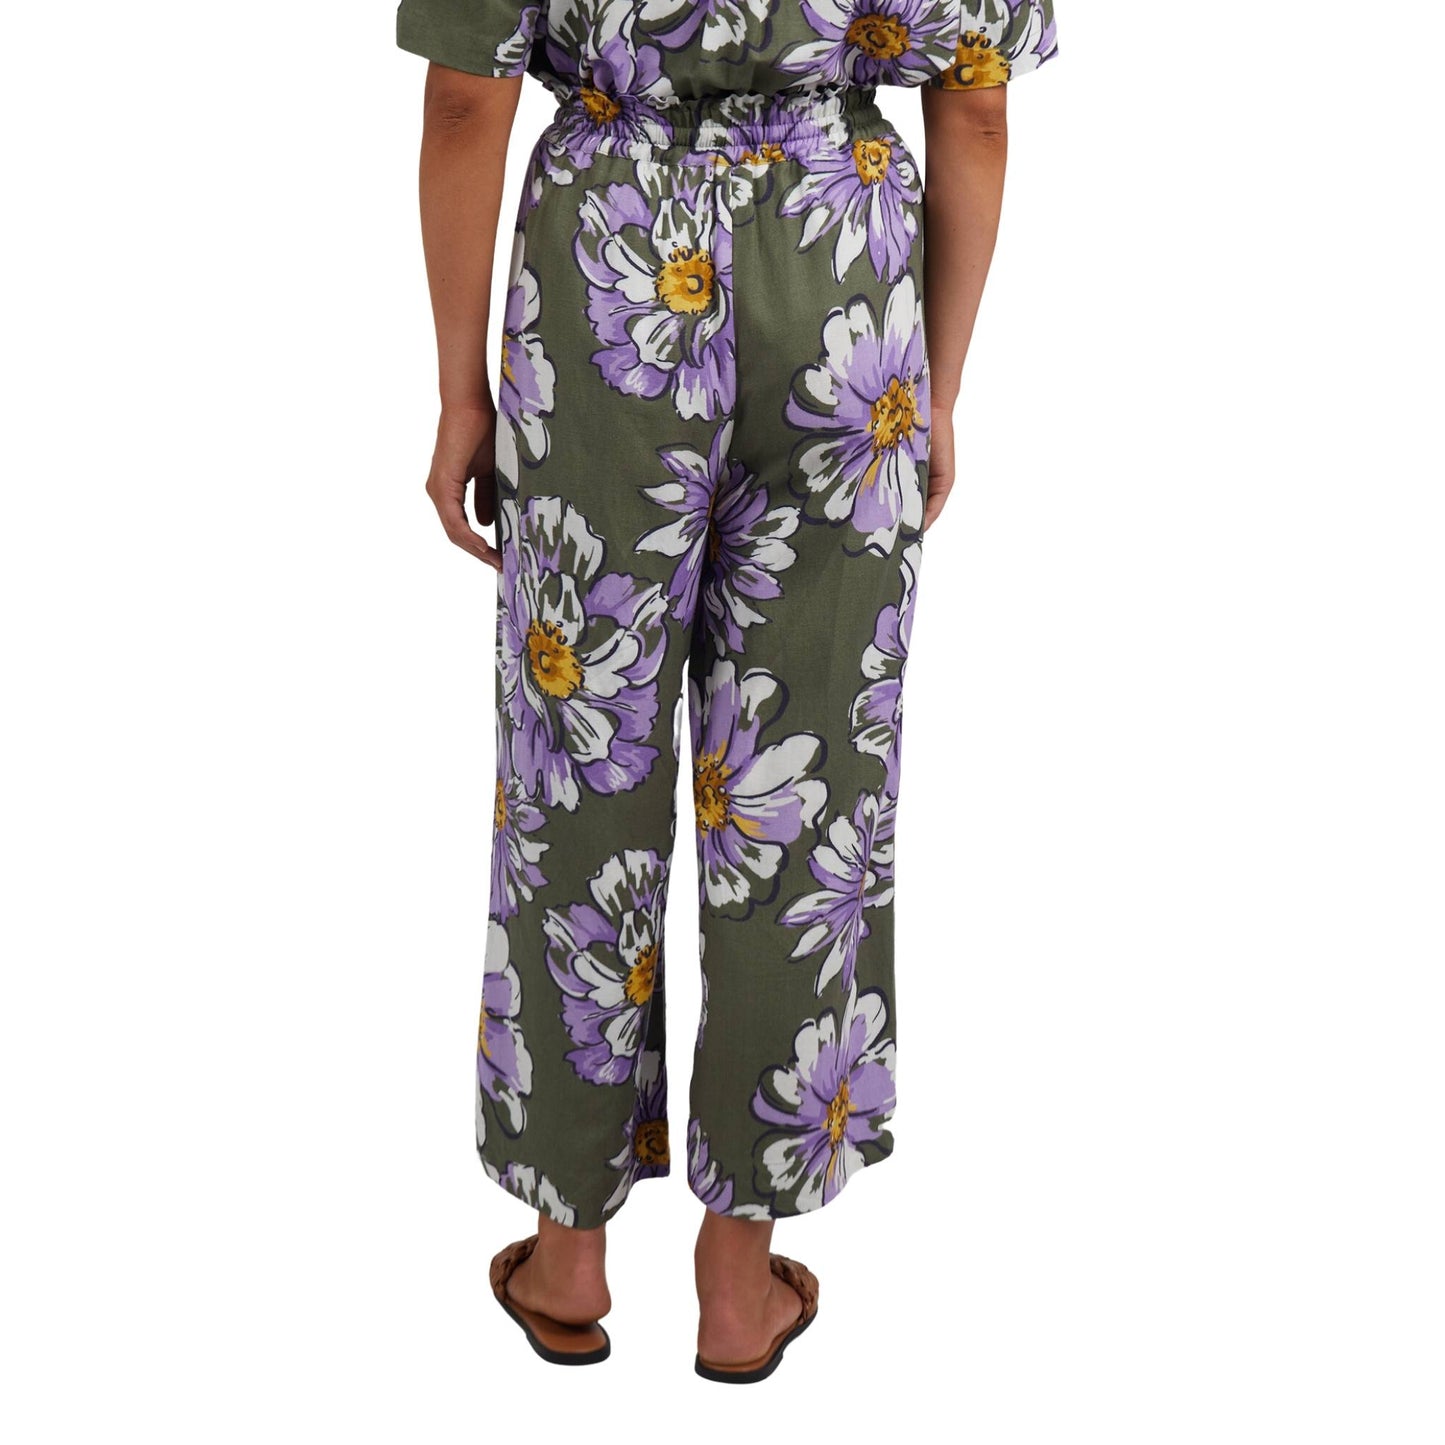 Made from flattering and drapey linen lyocell the Antheia Floral Wide Leg Pant from Elm pants are the ideal seasonal addition to your wardrobe. These wide leg pants have a green base with lilac petaled watercolour flowers. The pants have pockets and a drawstring paperbag waist